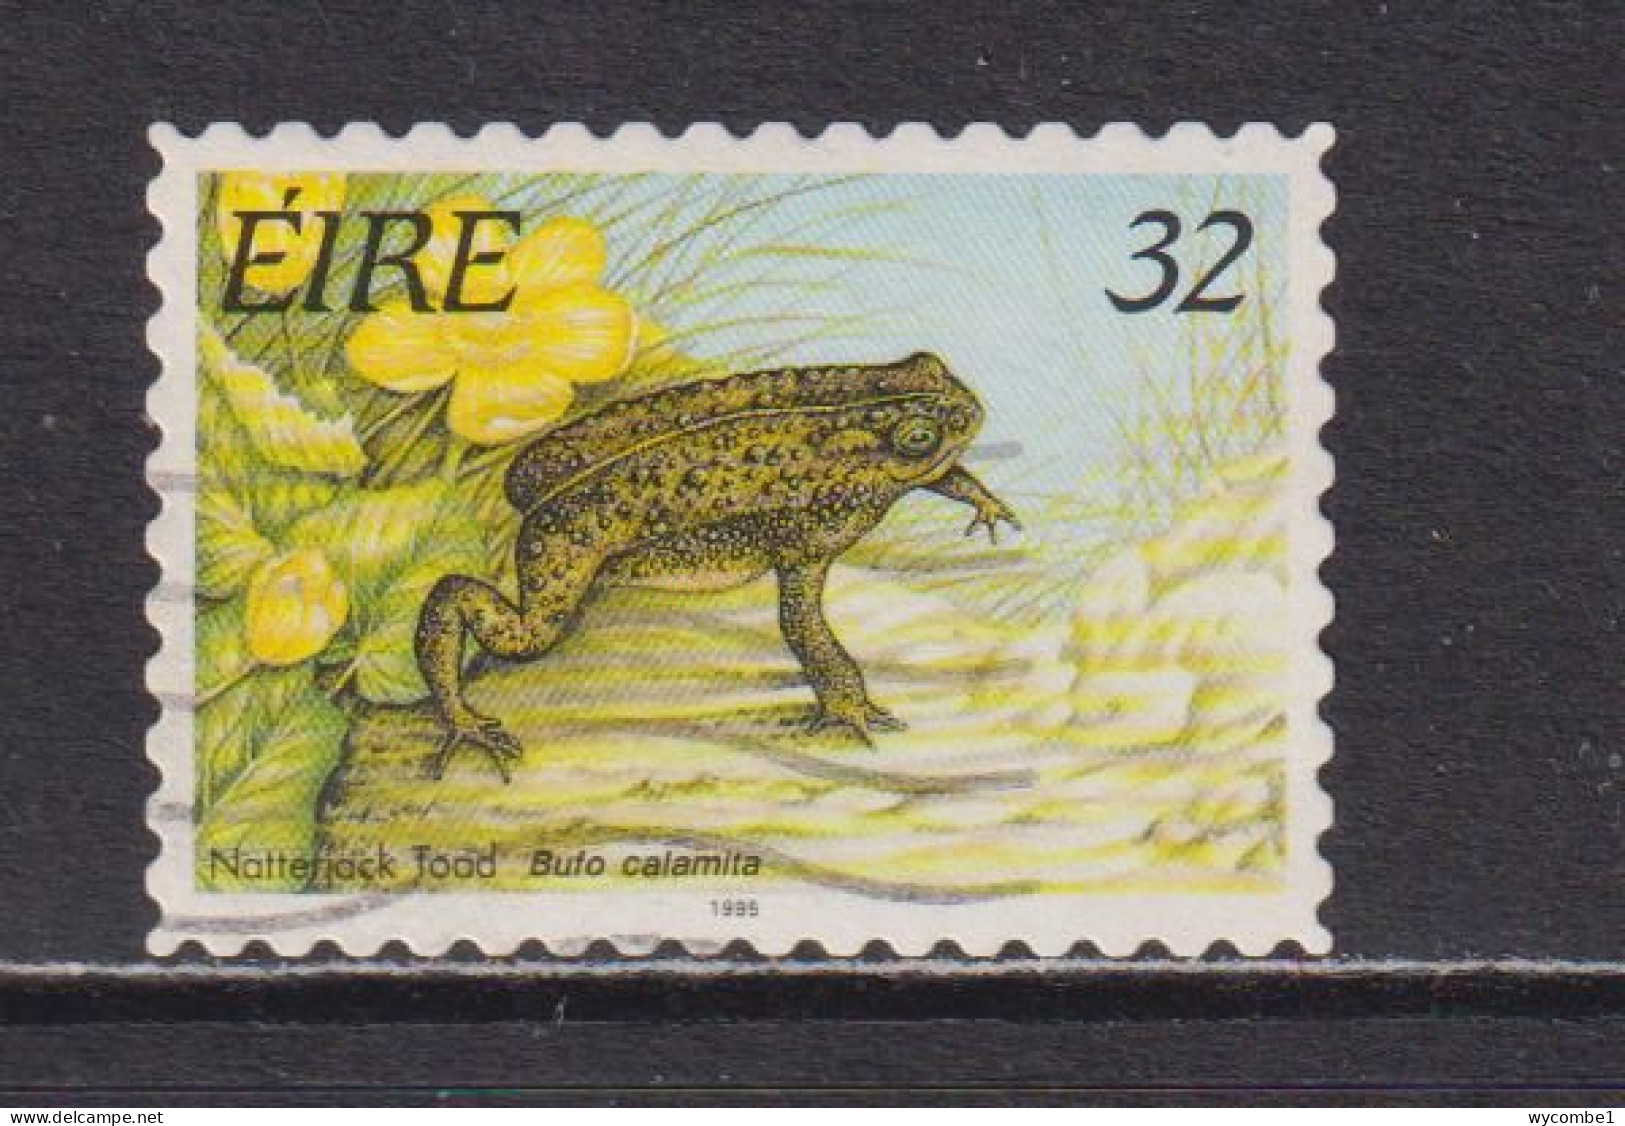 IRELAND - 1995  Reptiles And Amphibians  32p Used As Scan - Oblitérés